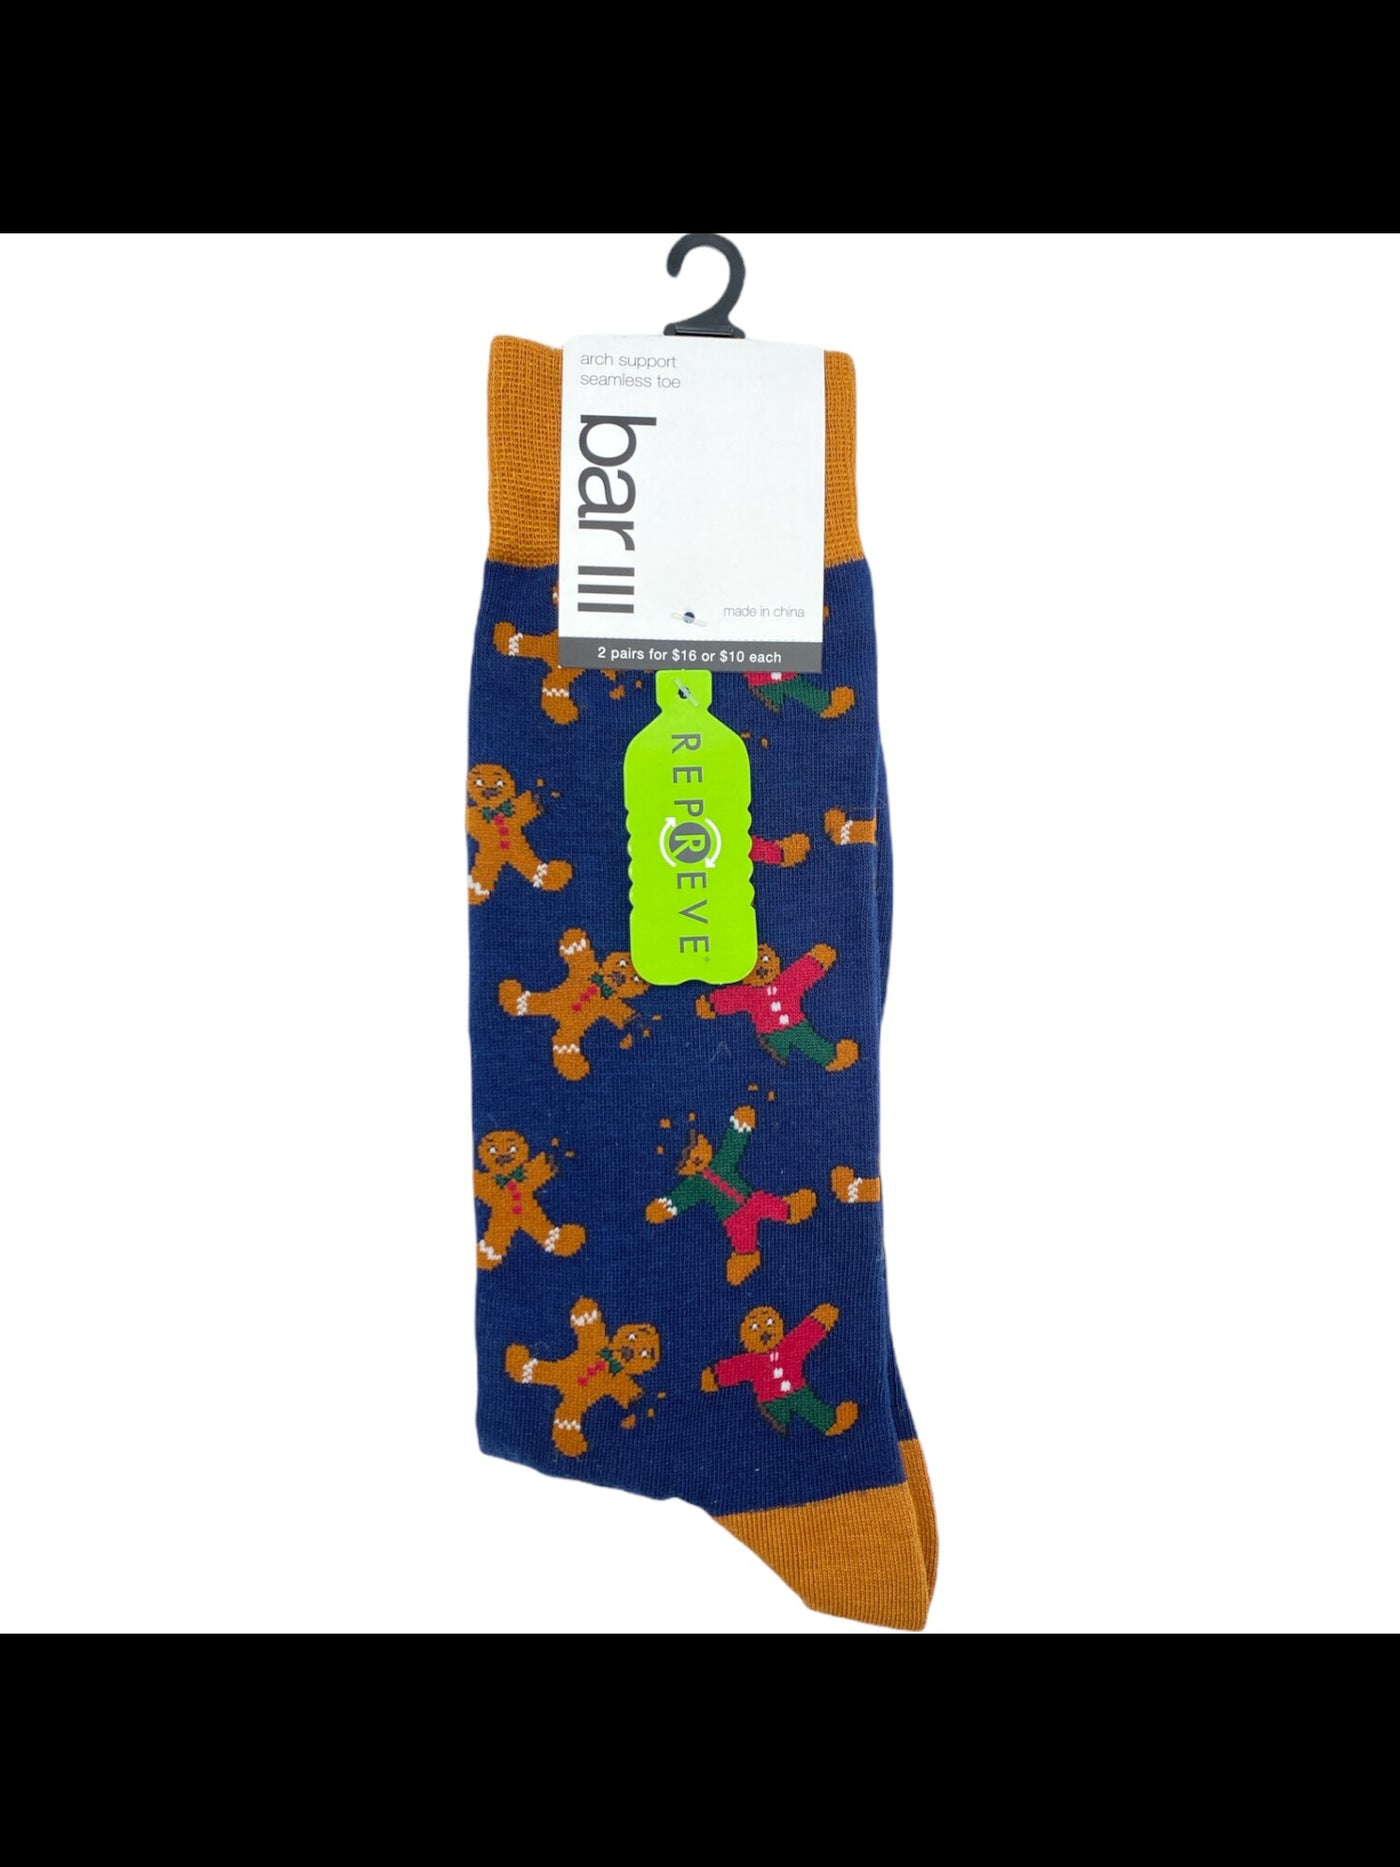 BAR III Mens Navy Graphic Arch Support Seamless Holiday Novelty Crew Socks 7-12